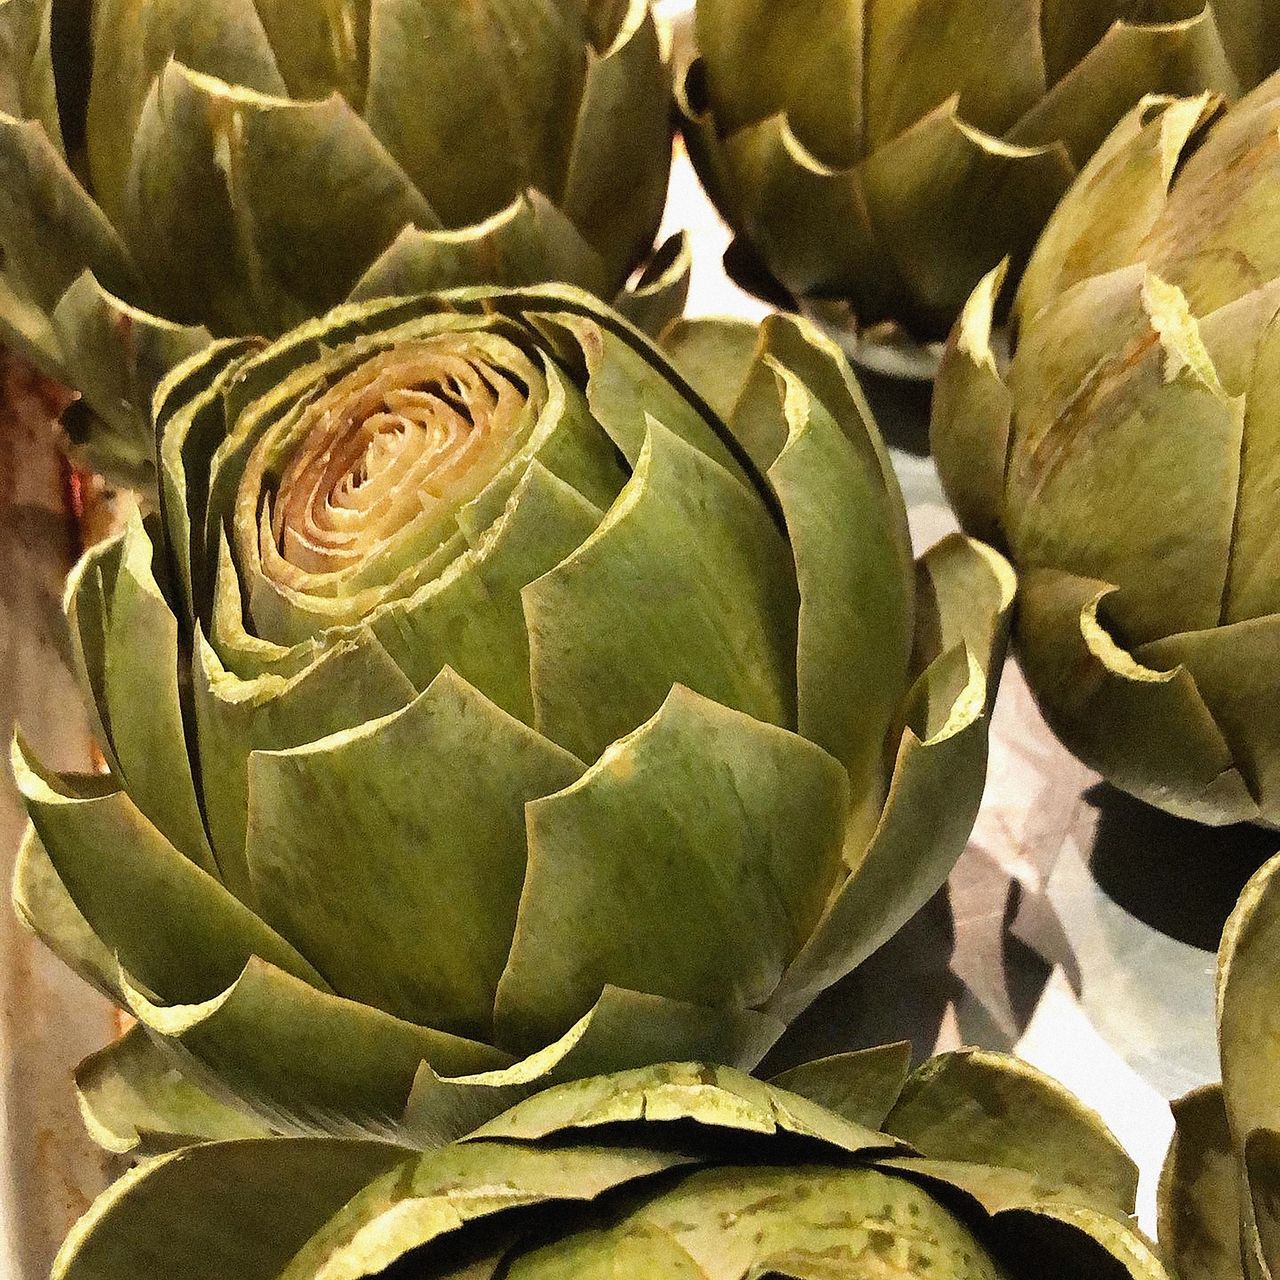 Artichokes. (Photo by: GHI-Plexi/UCG/Universal Images Group via Getty Images)